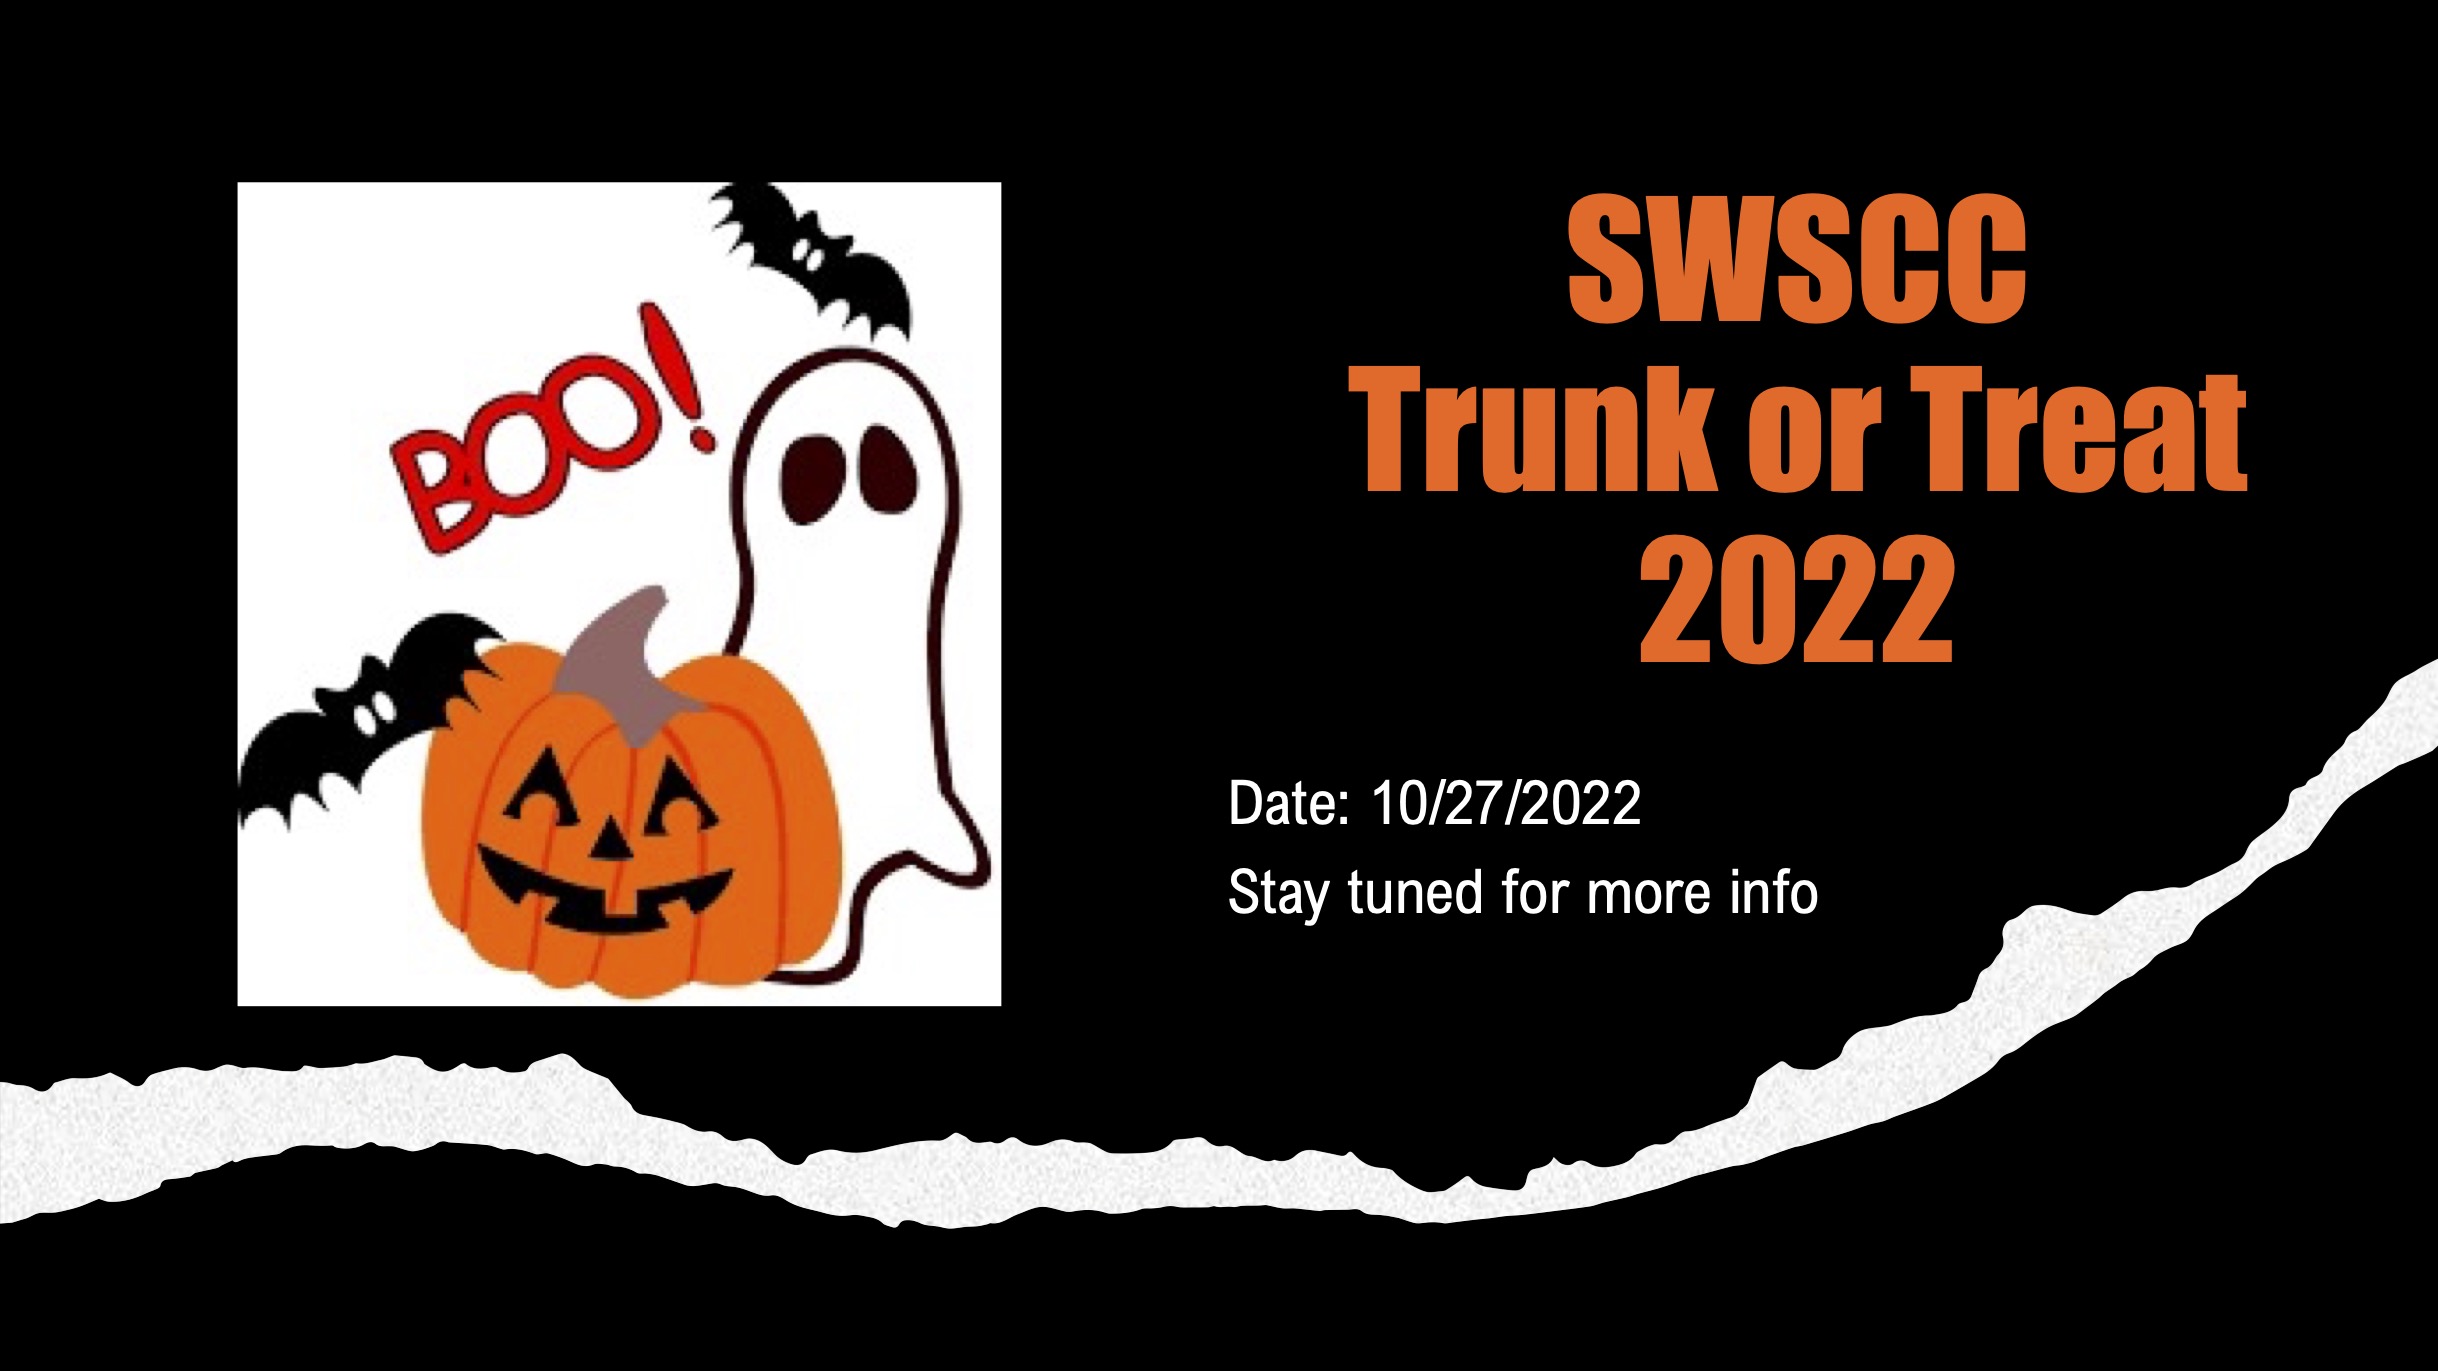 SWSCC Trunk or Treat 2022